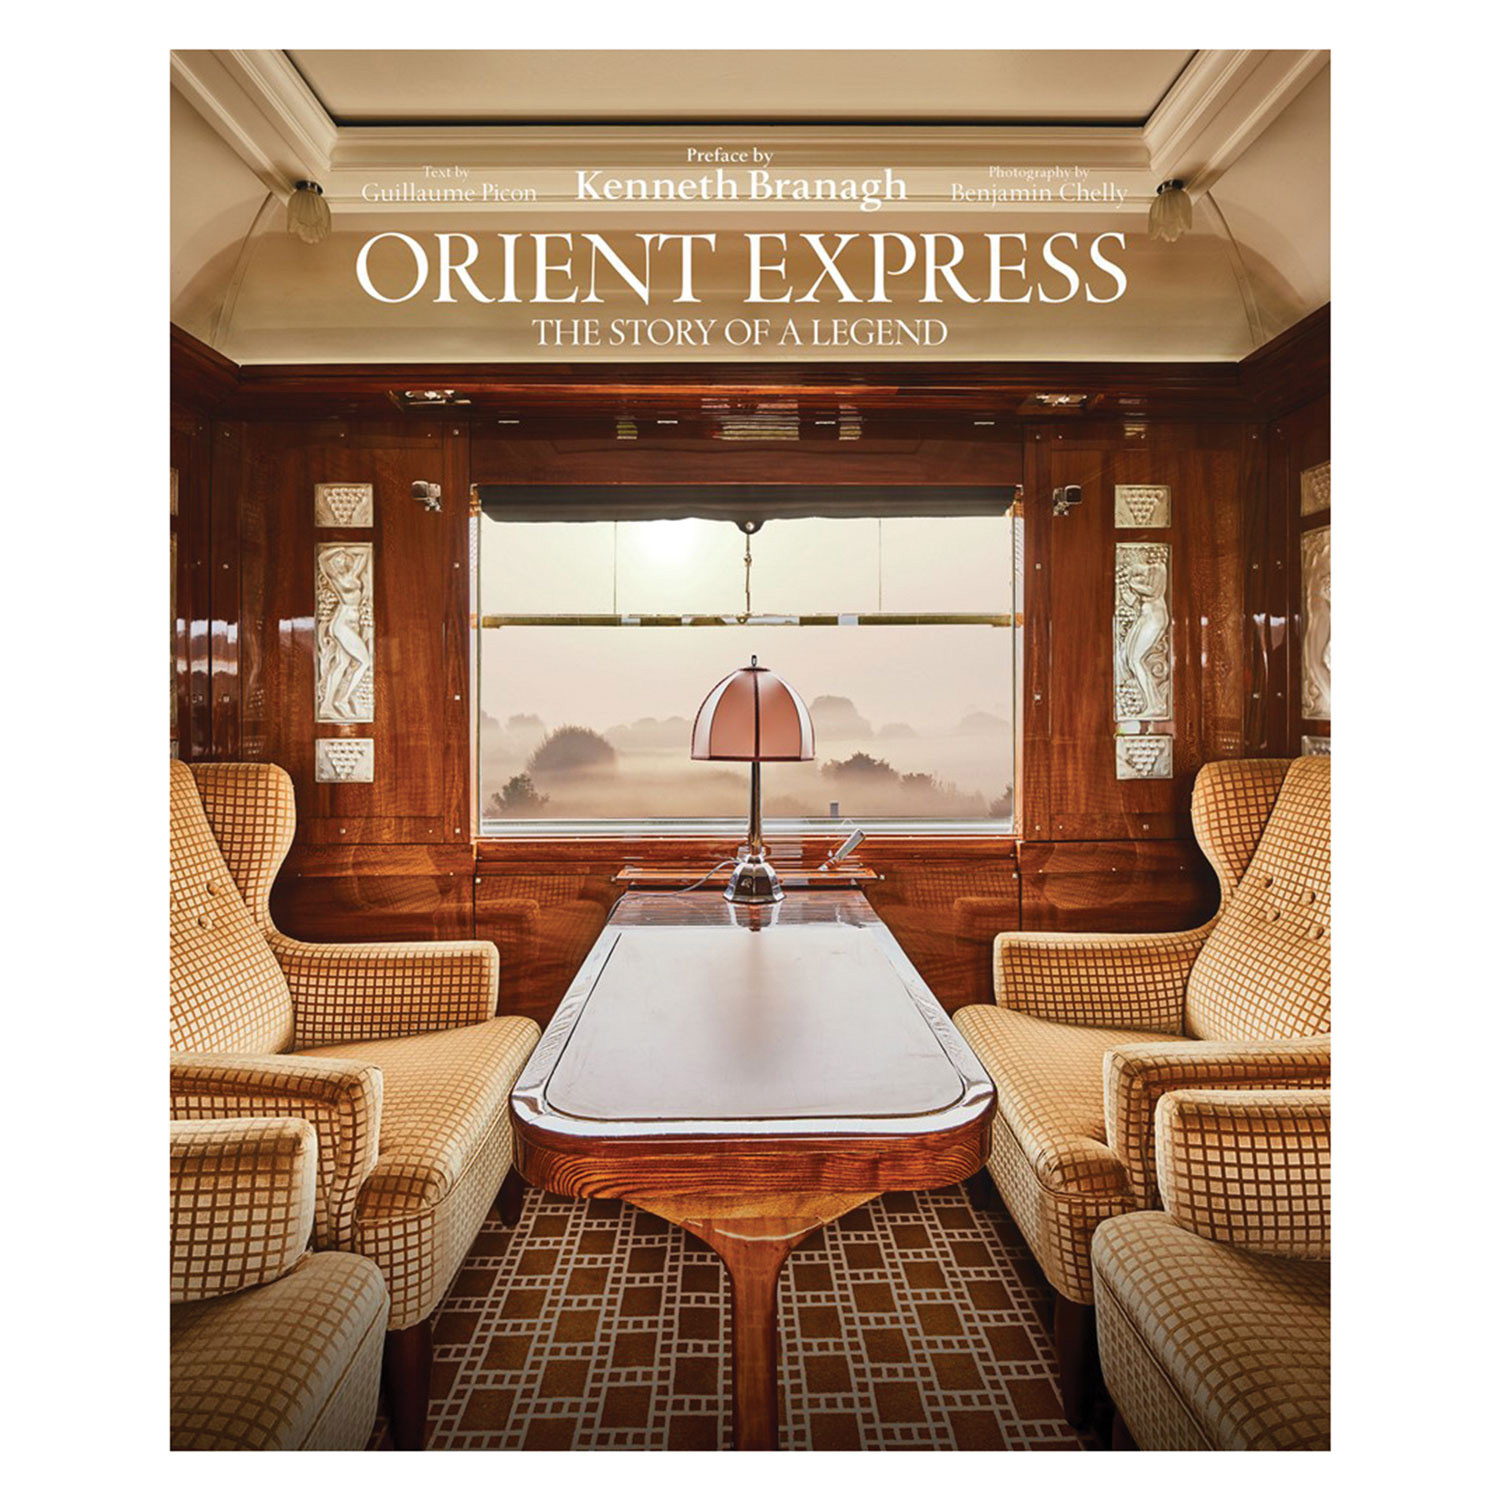 Orient Express The Story of a Legend Hardcover Book 9781851499151 eBay